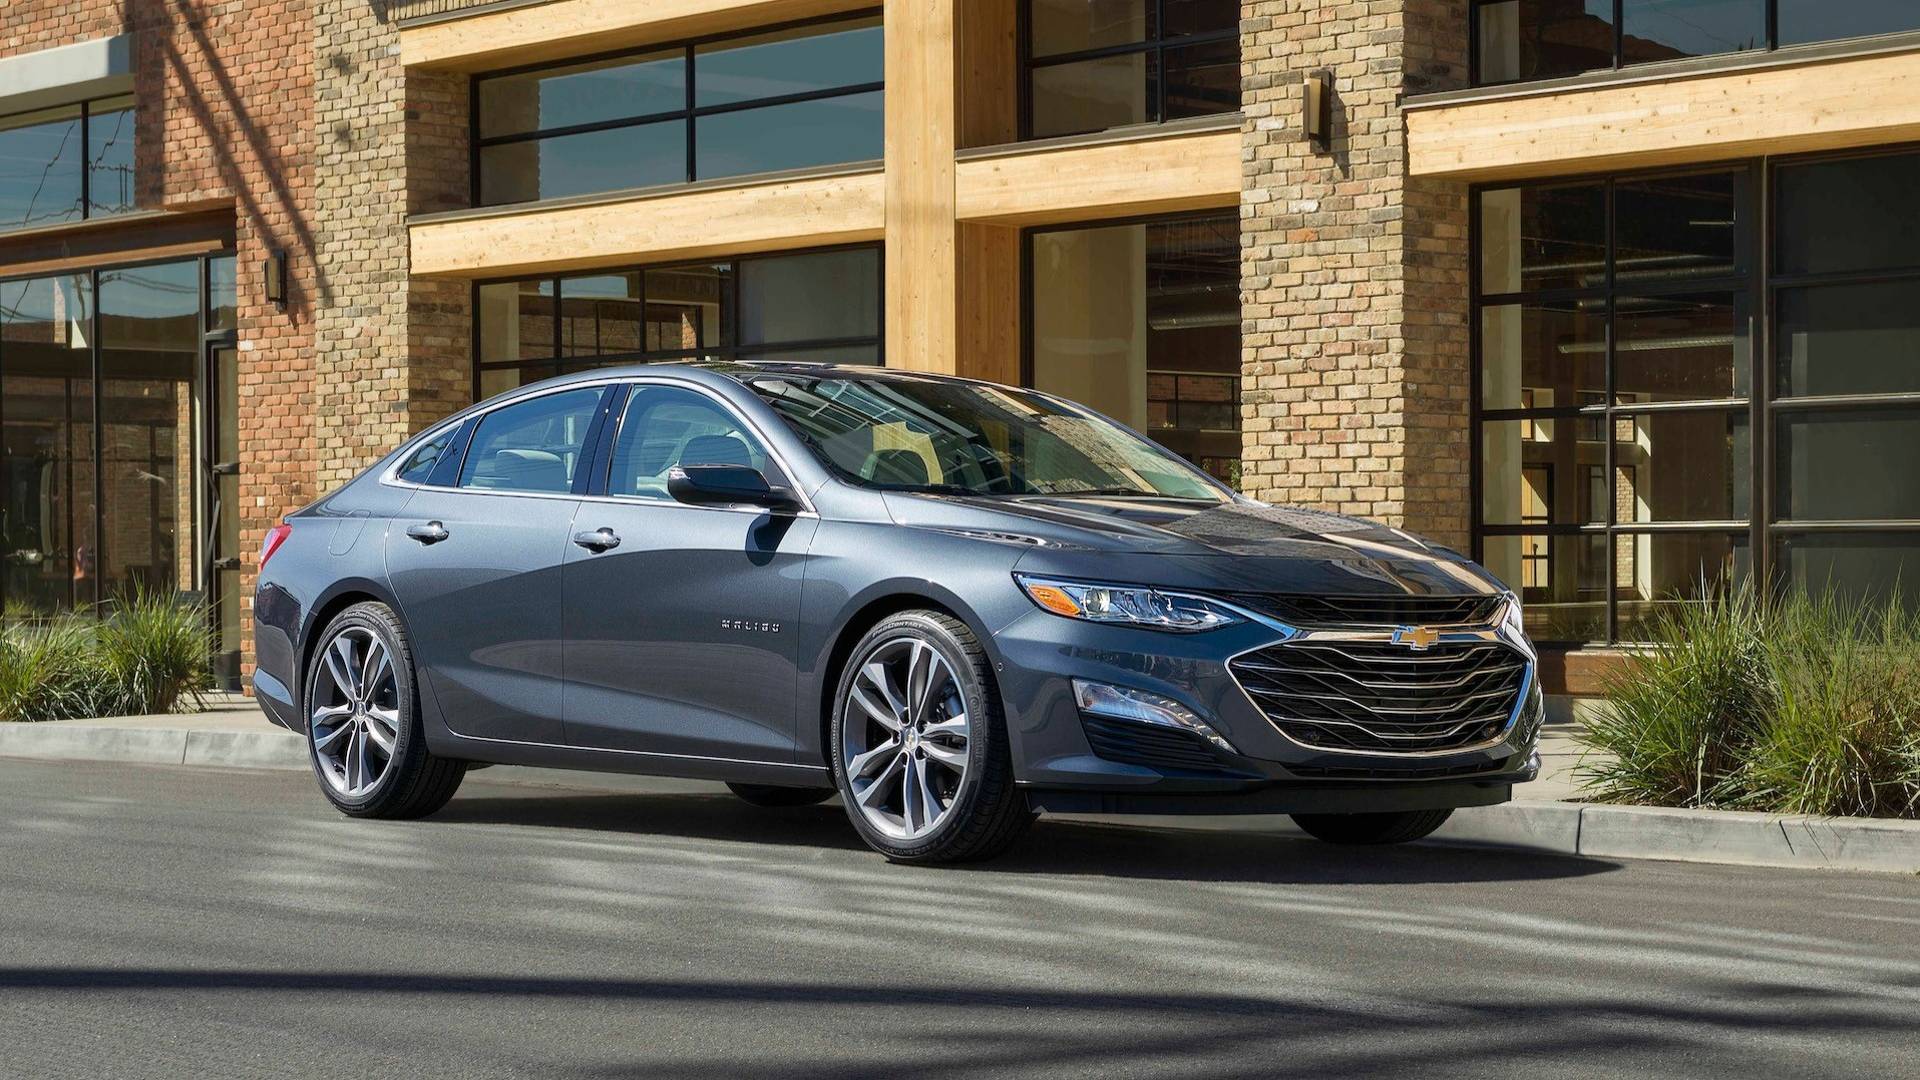 2019 Chevrolet Malibu Joins The Automaker's Facelifted ...